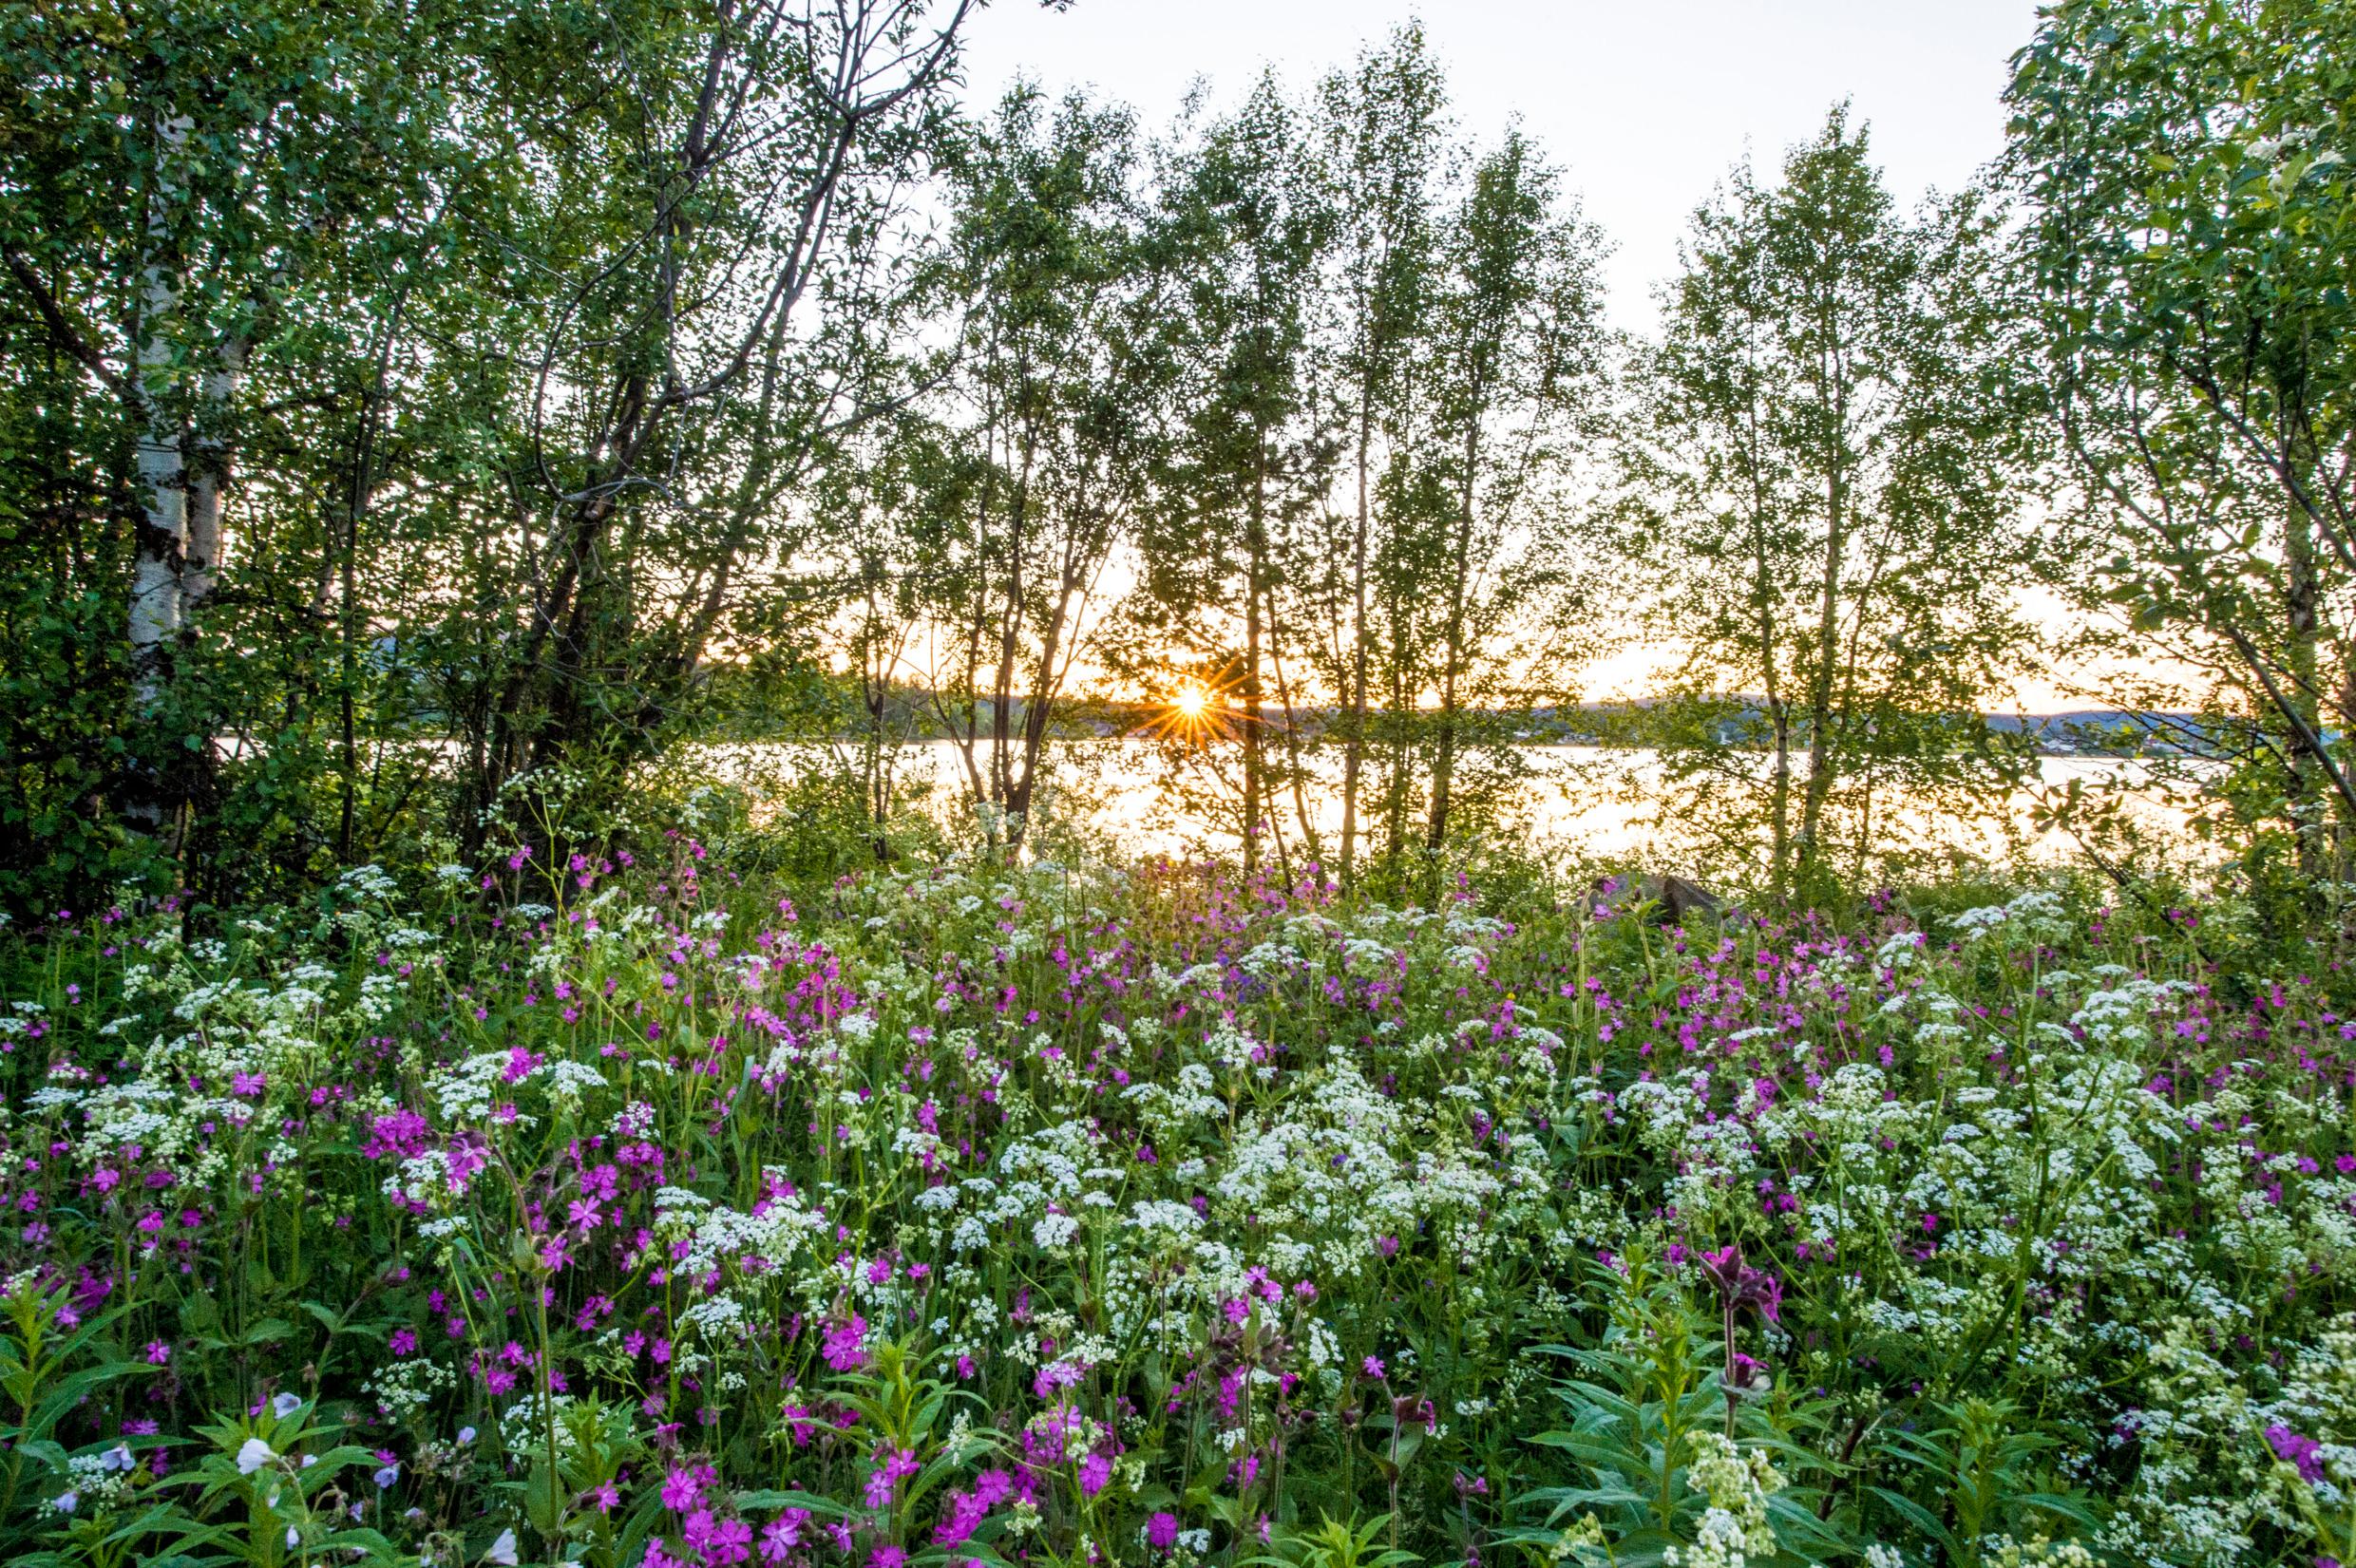 Nature view with wild flowers, trees and a lake in the backdrop.